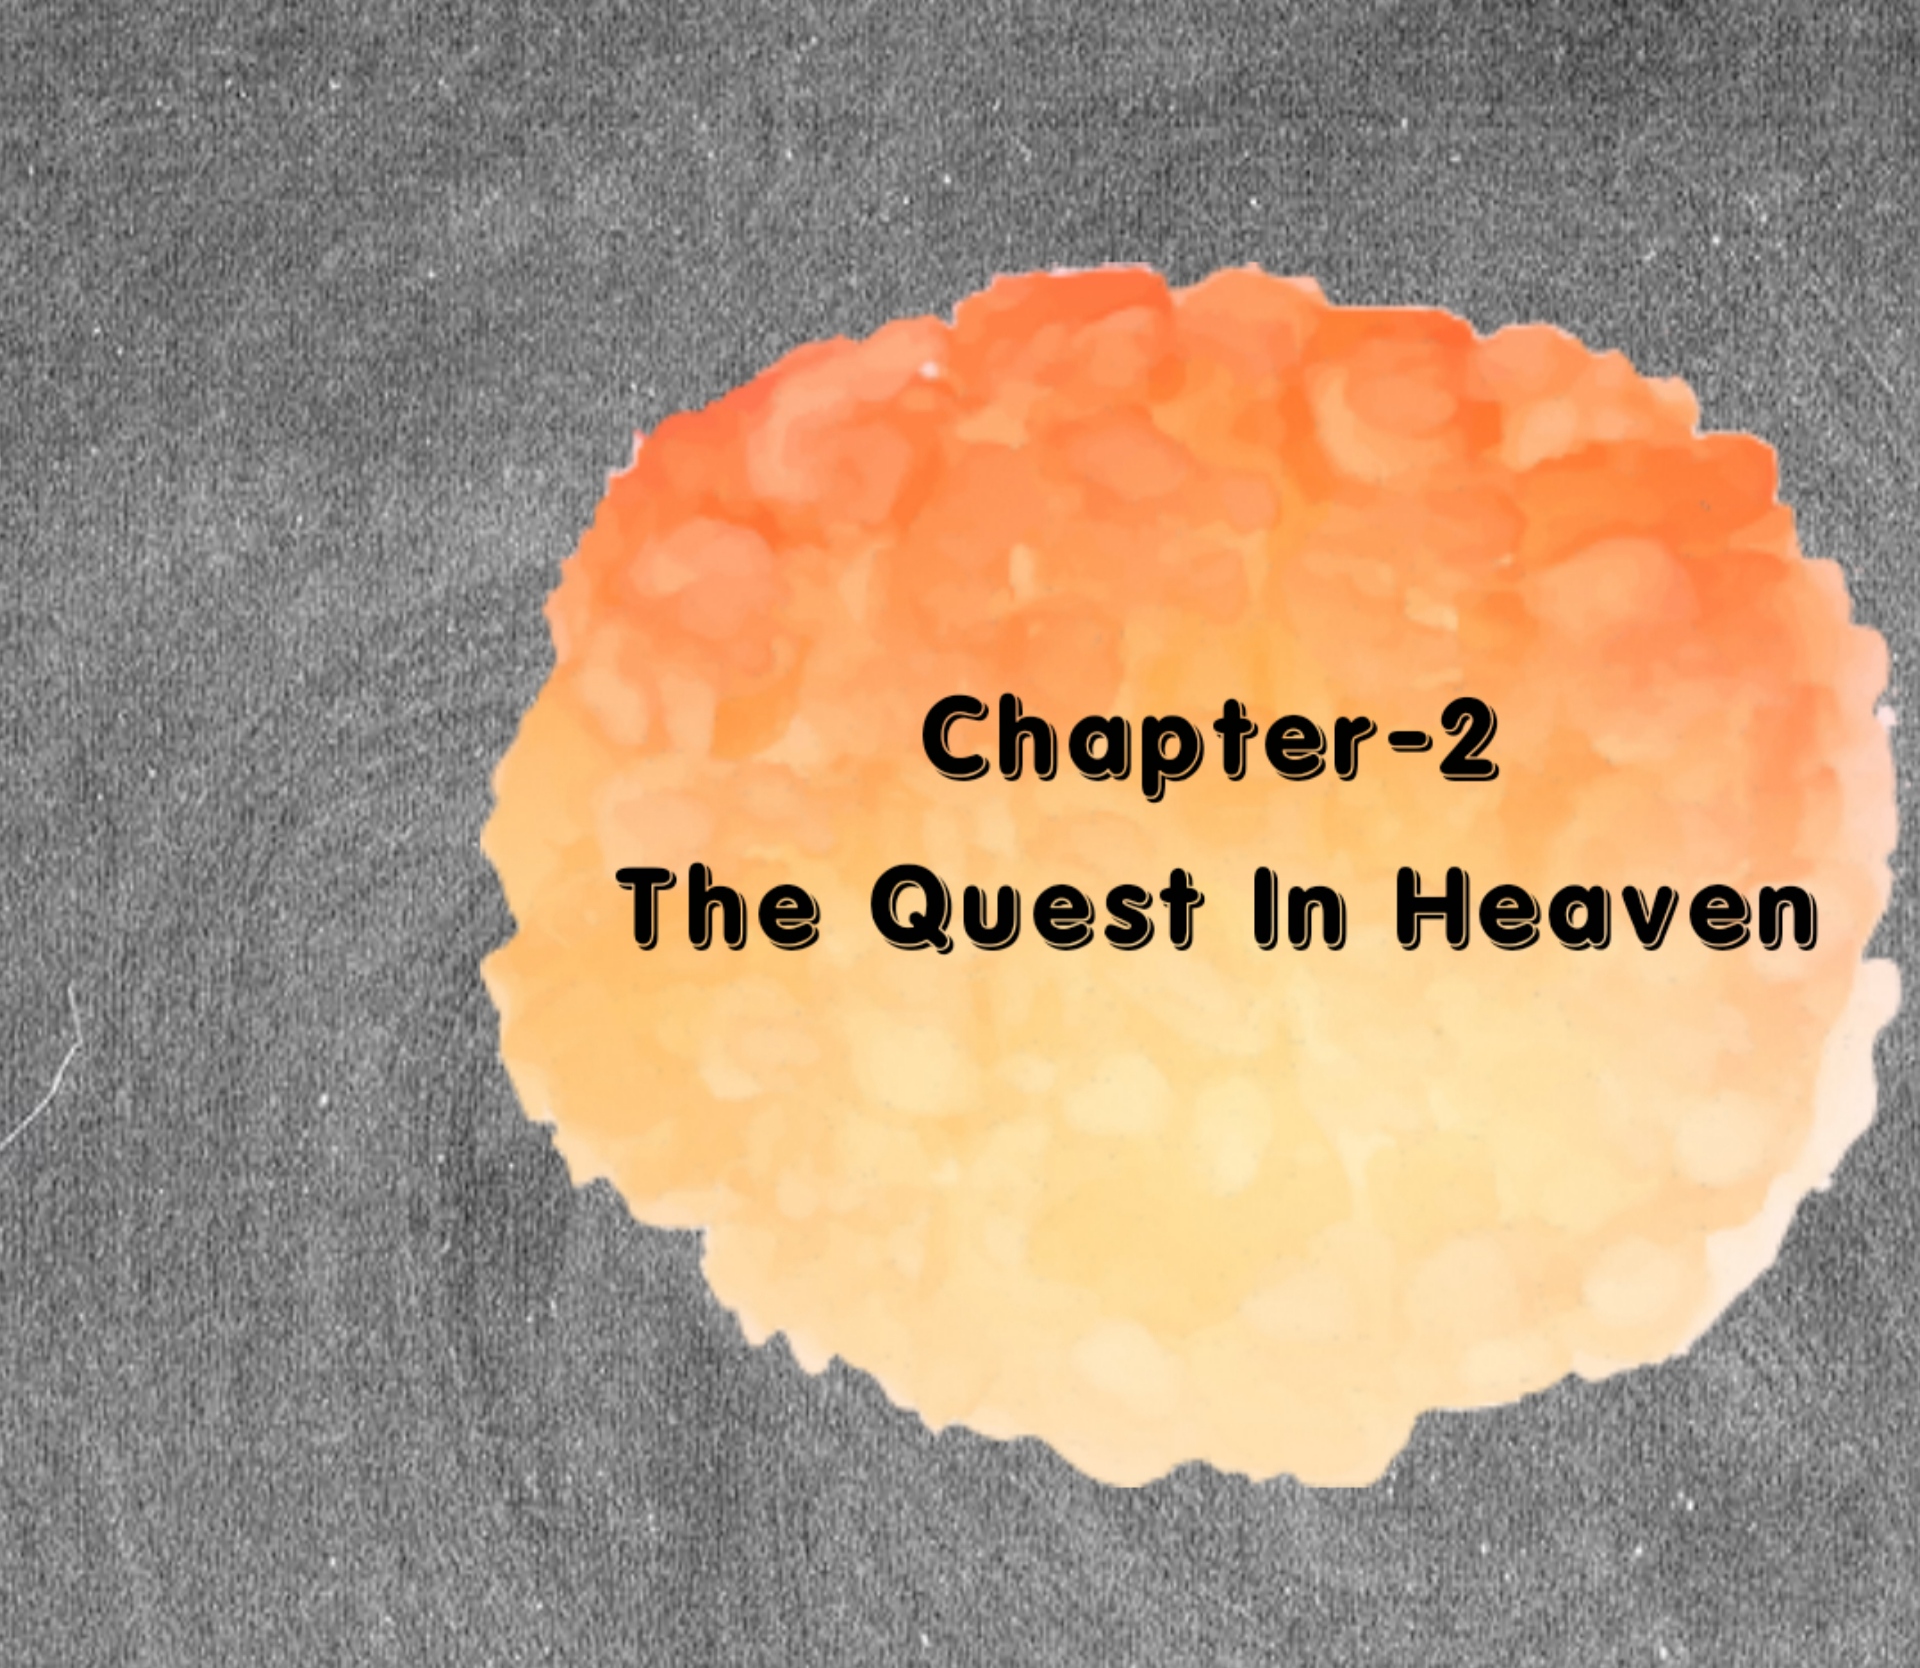 You are currently viewing Chapter-2: The Quest In Heaven